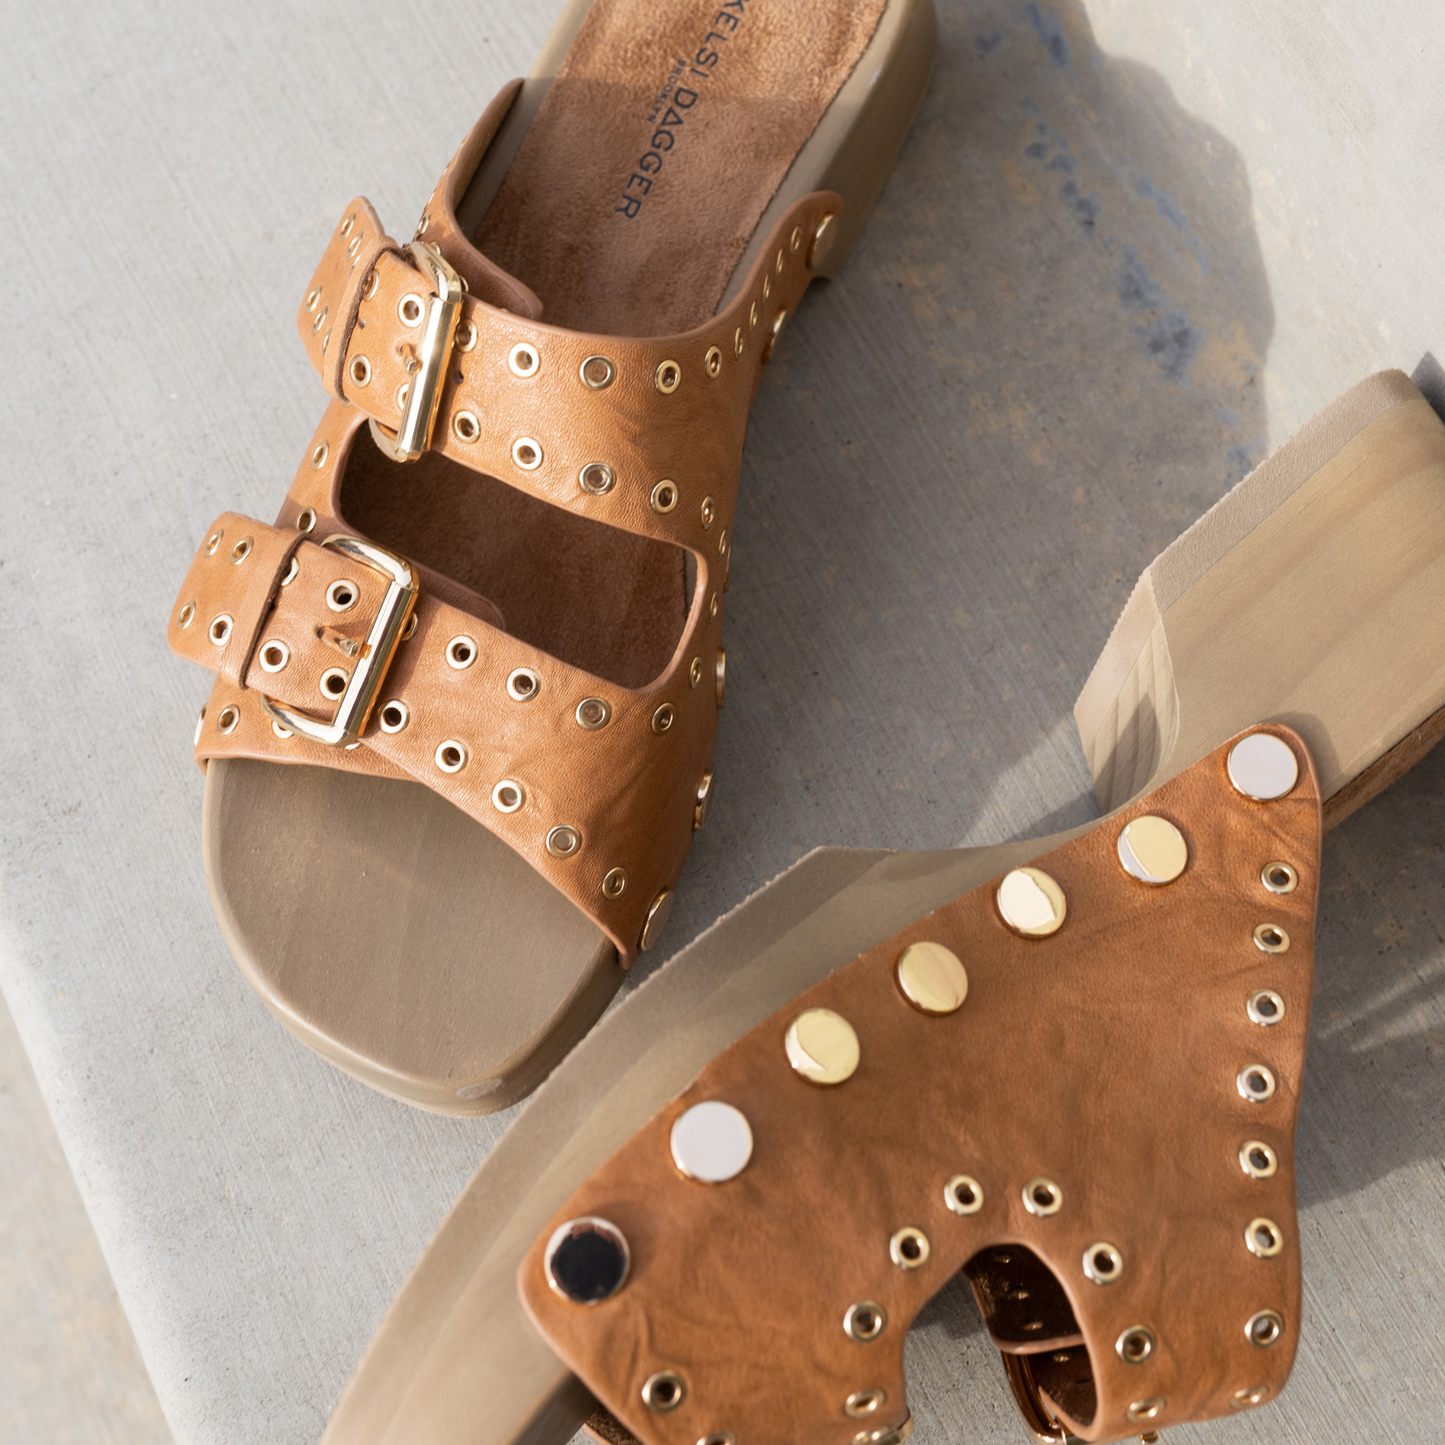 Tan clog sandal from Kelsi Dagger BK - stylish and comfortable footwear for any occasion